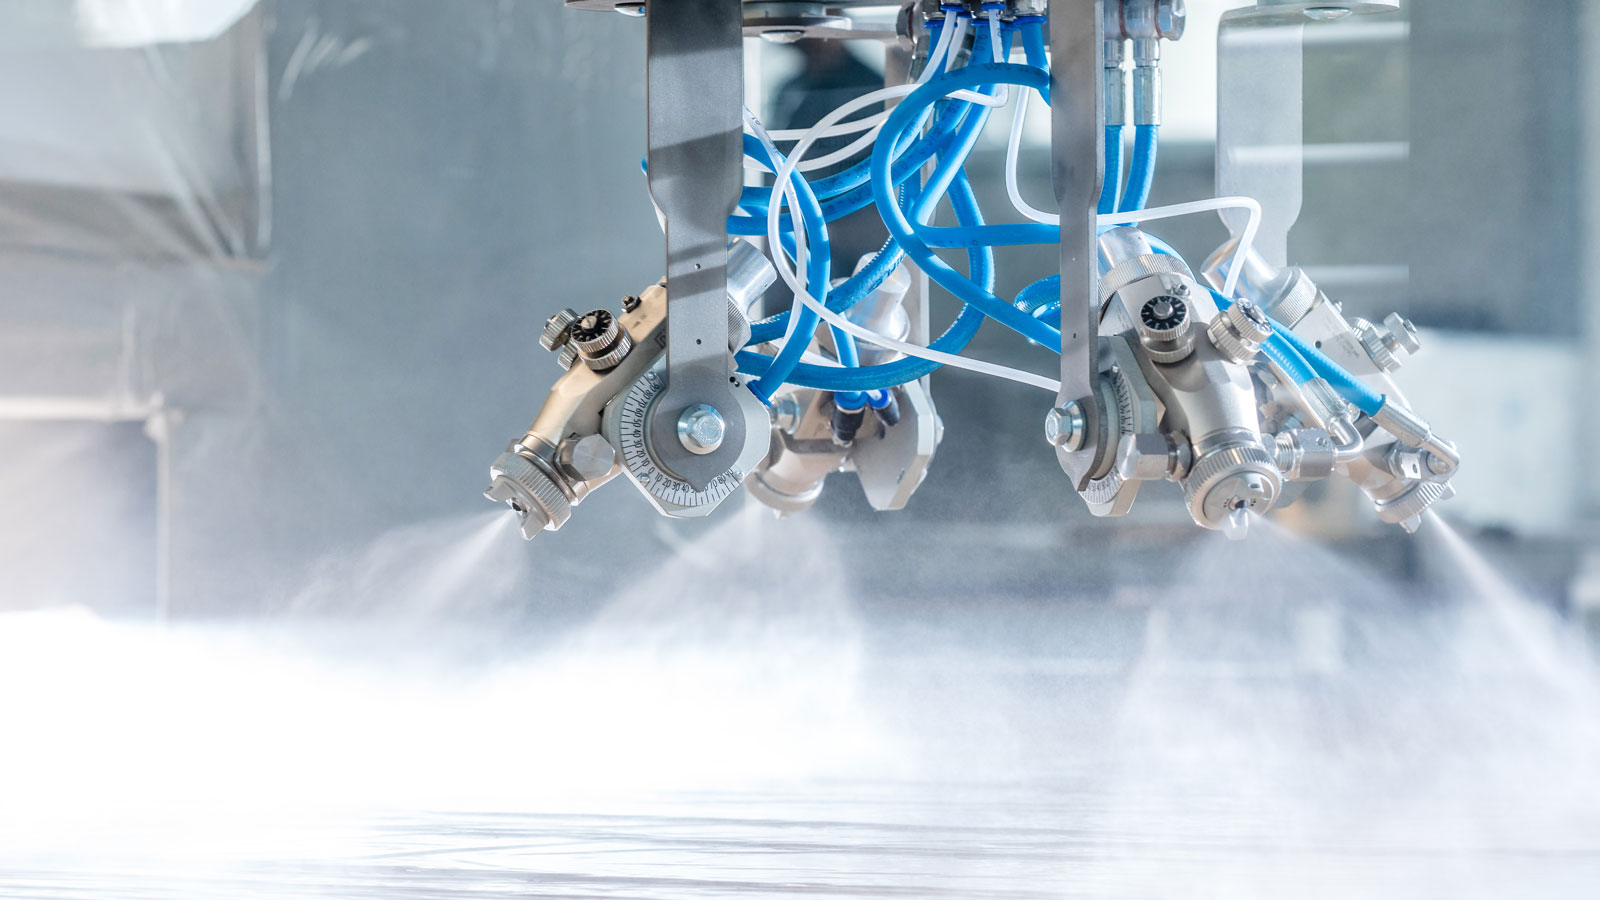 Highly efficient: The SPRAYTEQ S-100 is designed for automated spray coating in various machine designs